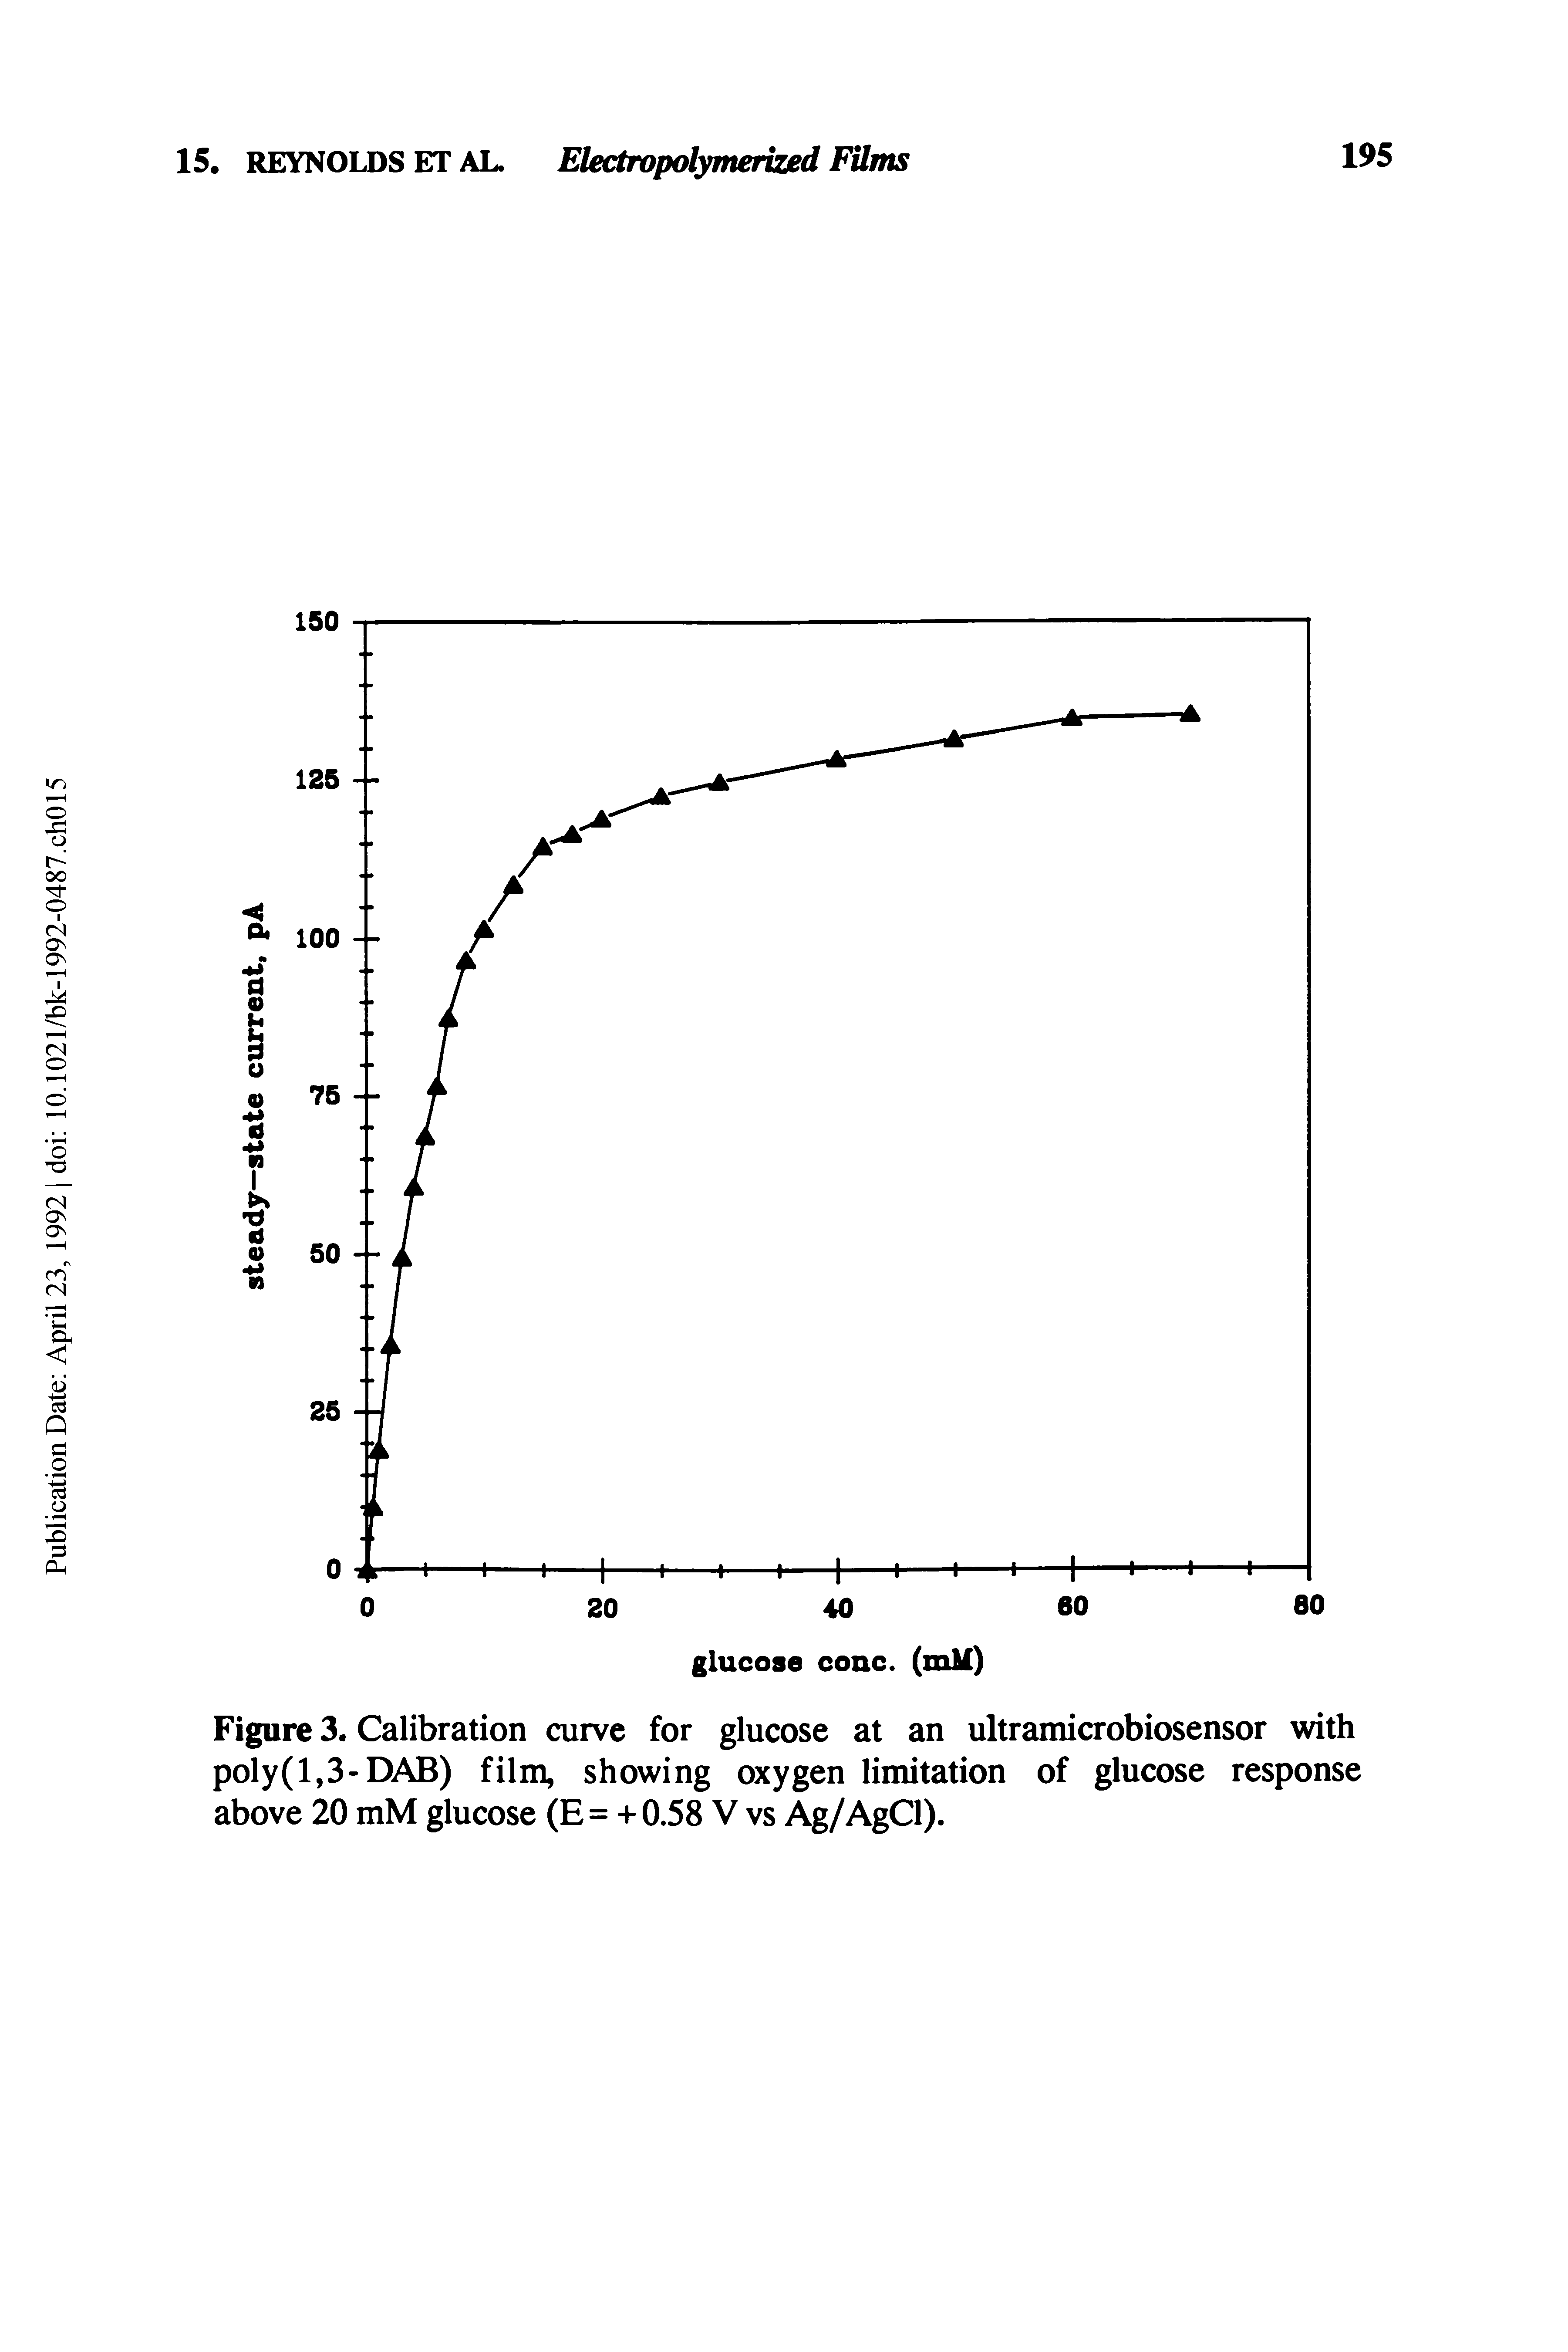 Figure 3. Calibration curve for glucose at an ultramicrobiosensor with poly(l,3-DAB) film, showing oxygen limitation of glucose response above 20 mM glucose (E= +0.58 V vs Ag/AgCl).